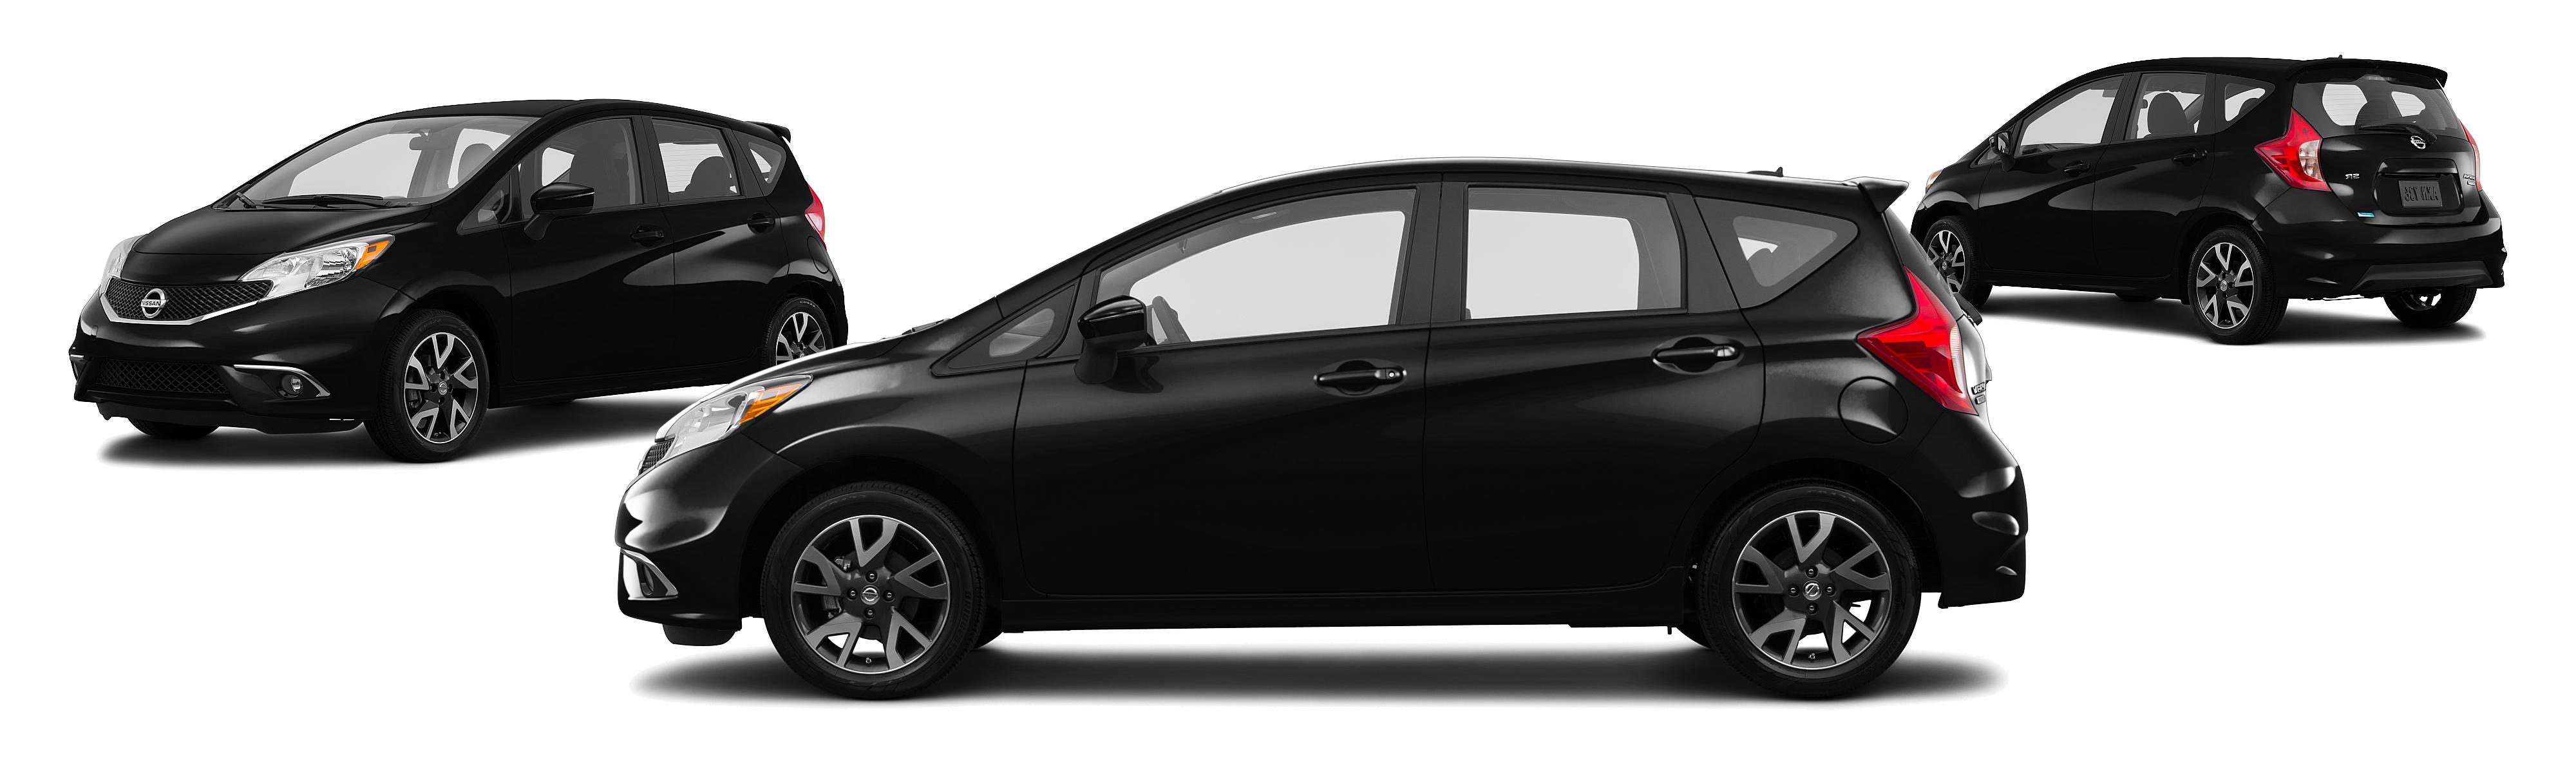 2015 Nissan Versa Note SR 4dr Hatchback (midyear release) - Research -  GrooveCar